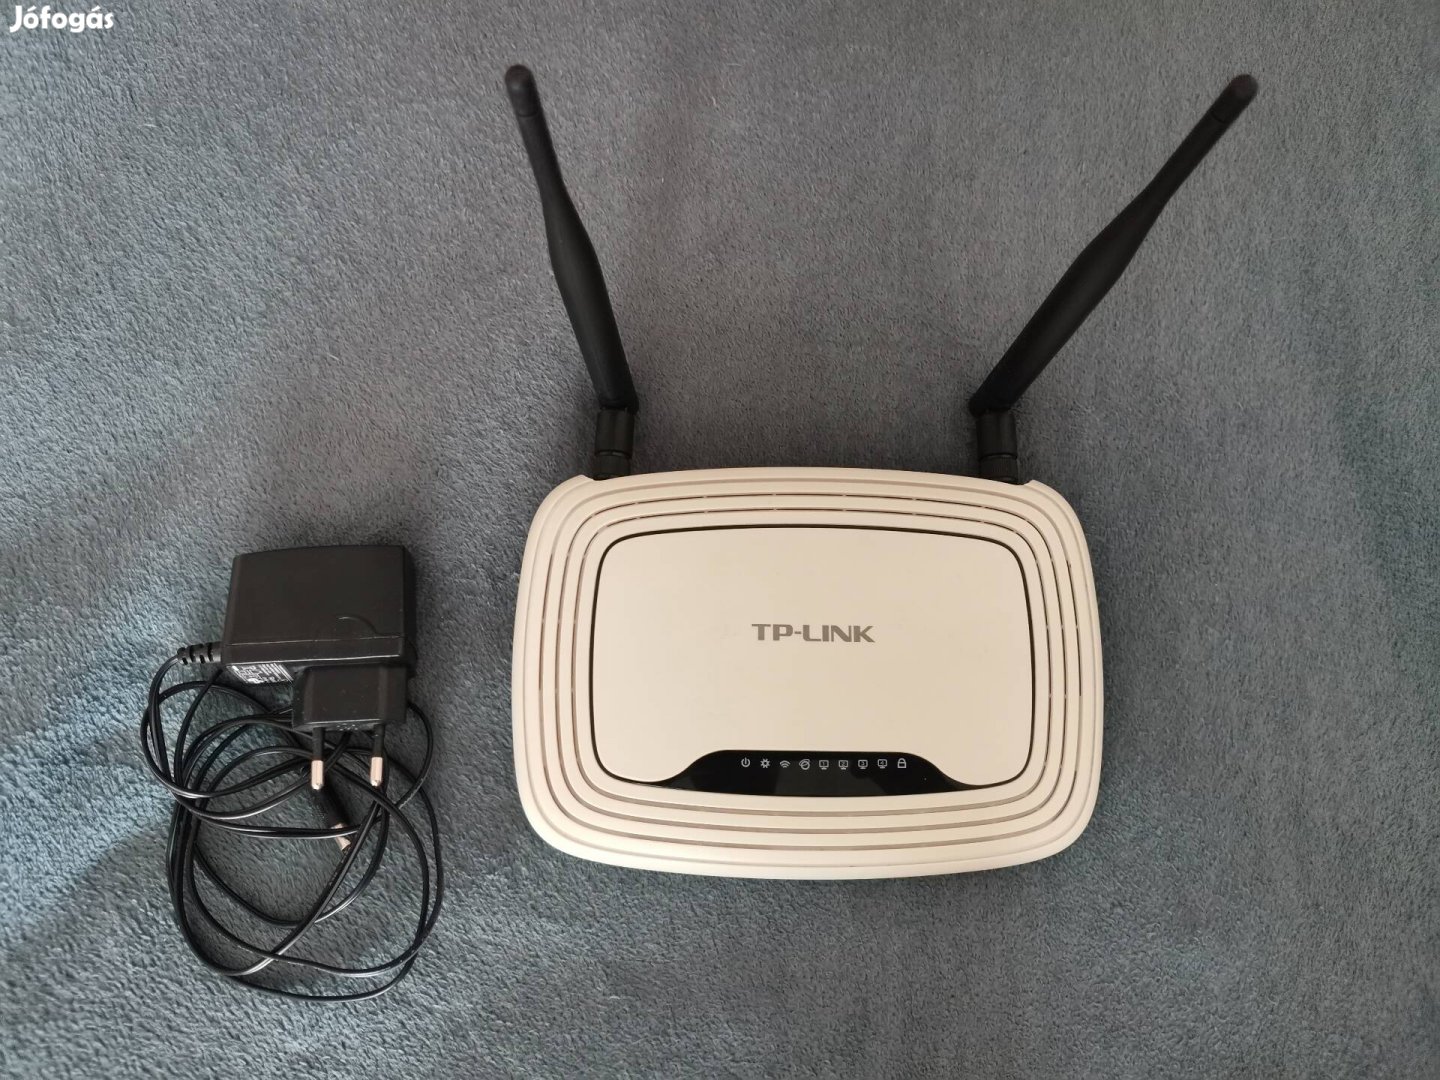 TP-Link TL-WR841ND Wifi N Router 300Mbps